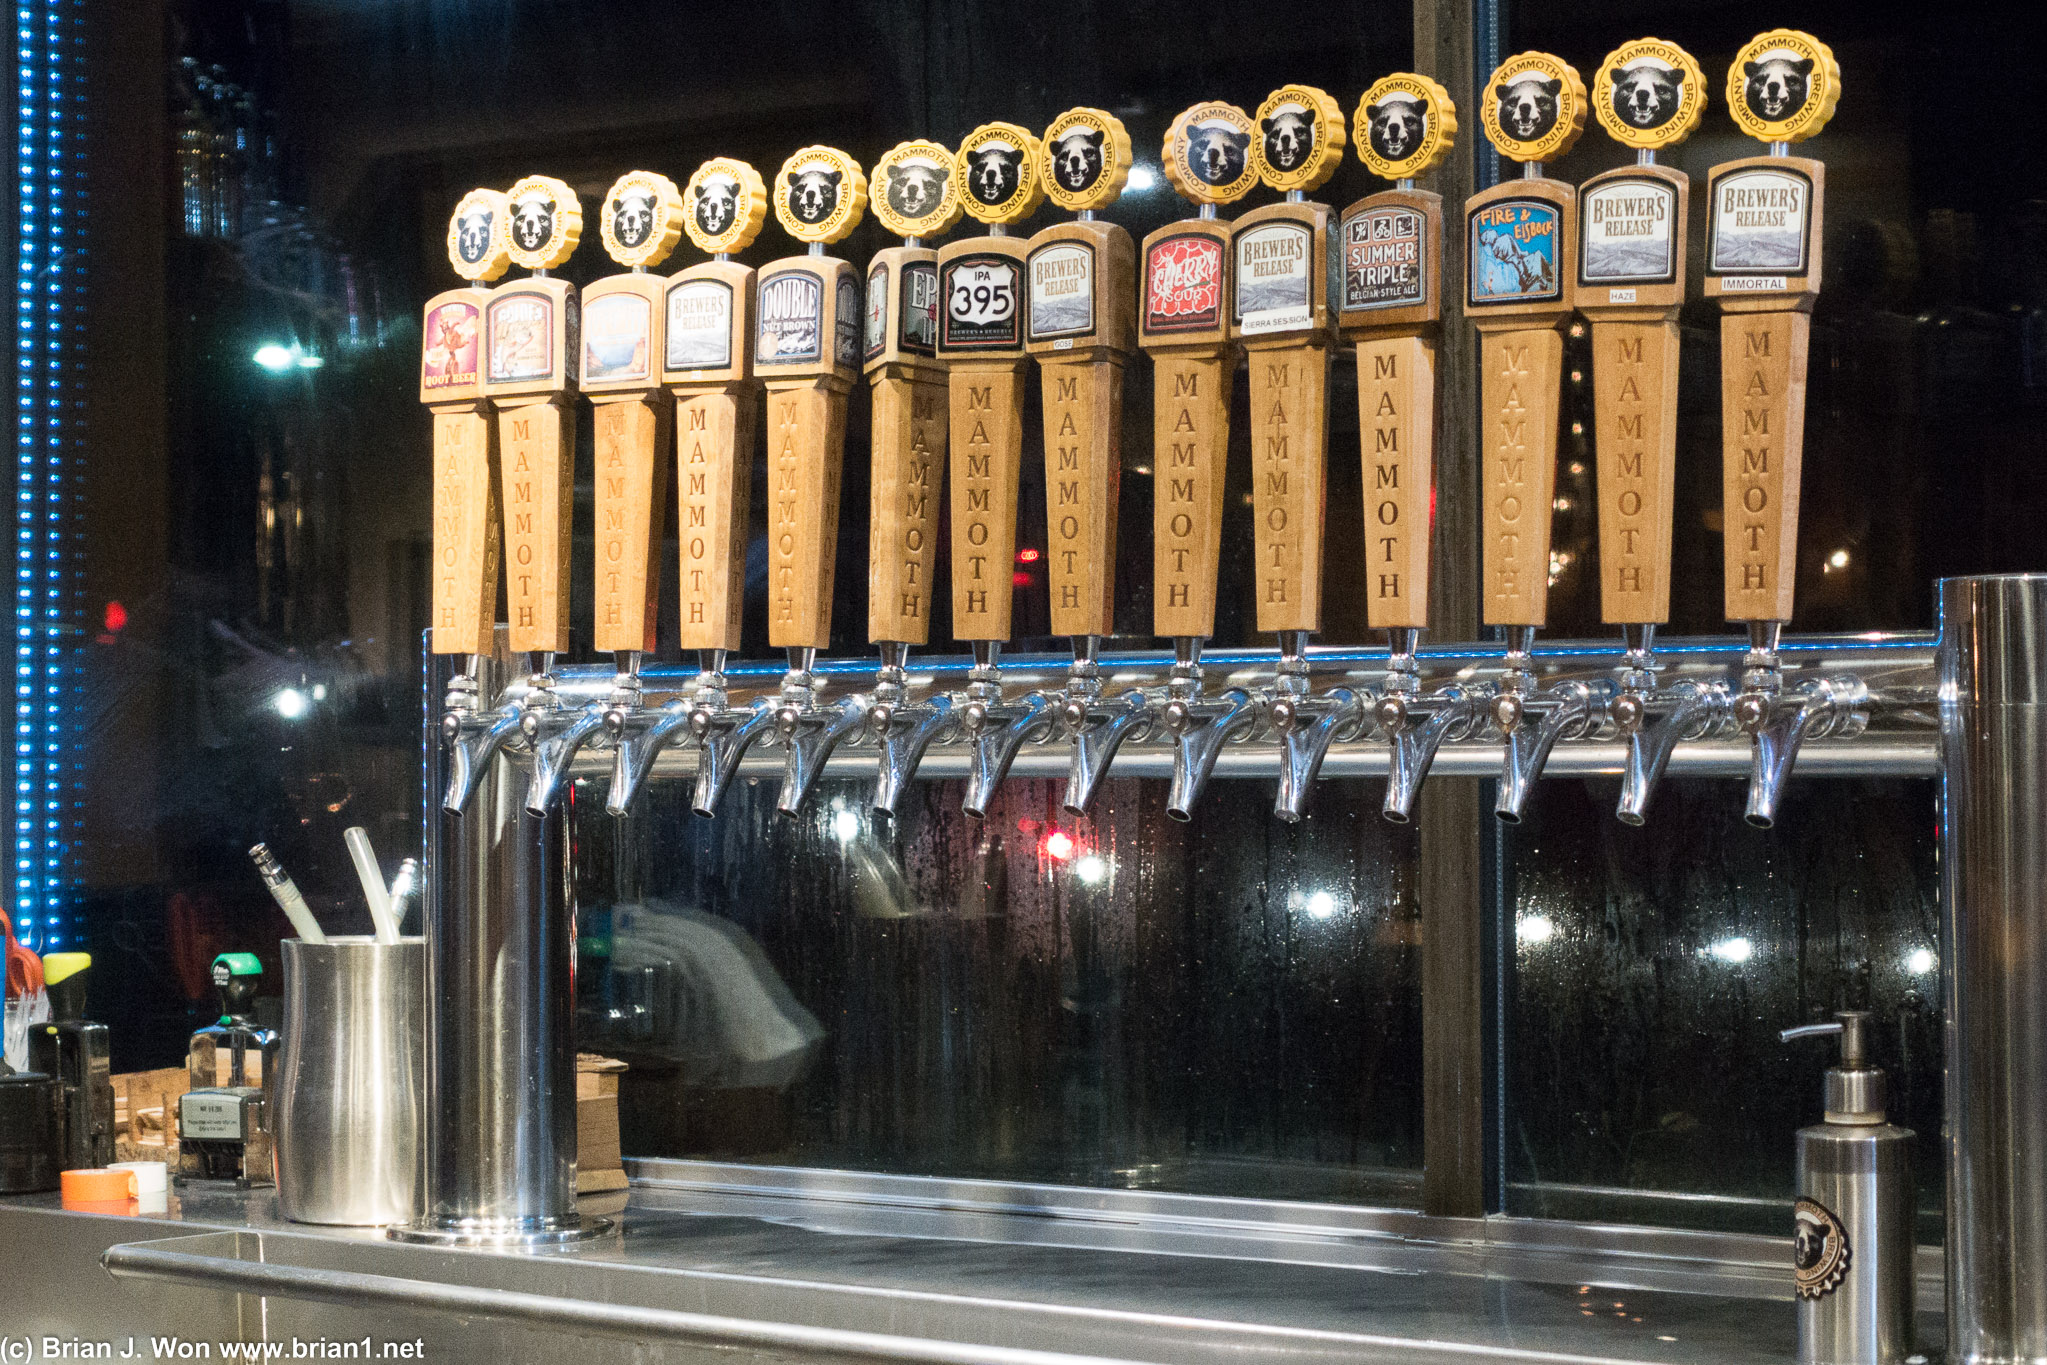 14 beers on tap at Mammoth Brewing.